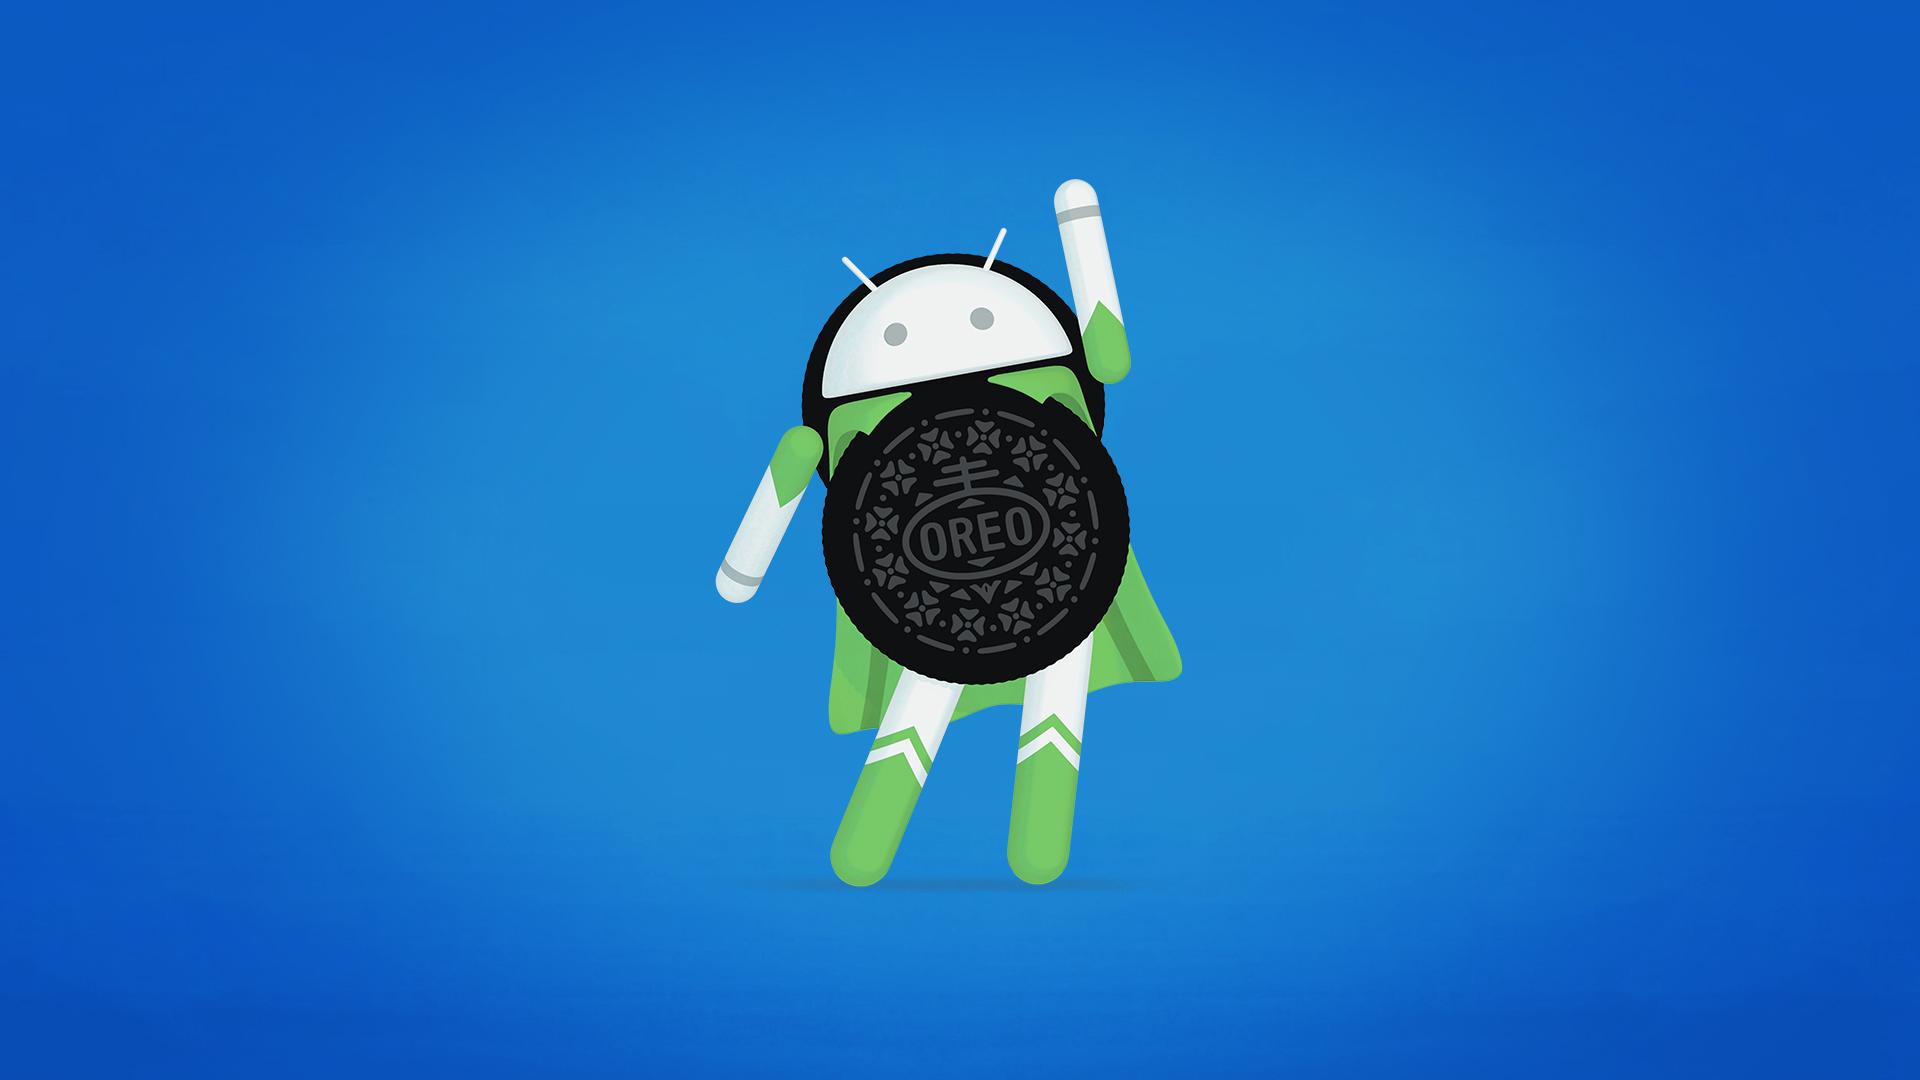 Android 8.0 Oreo - what is new?